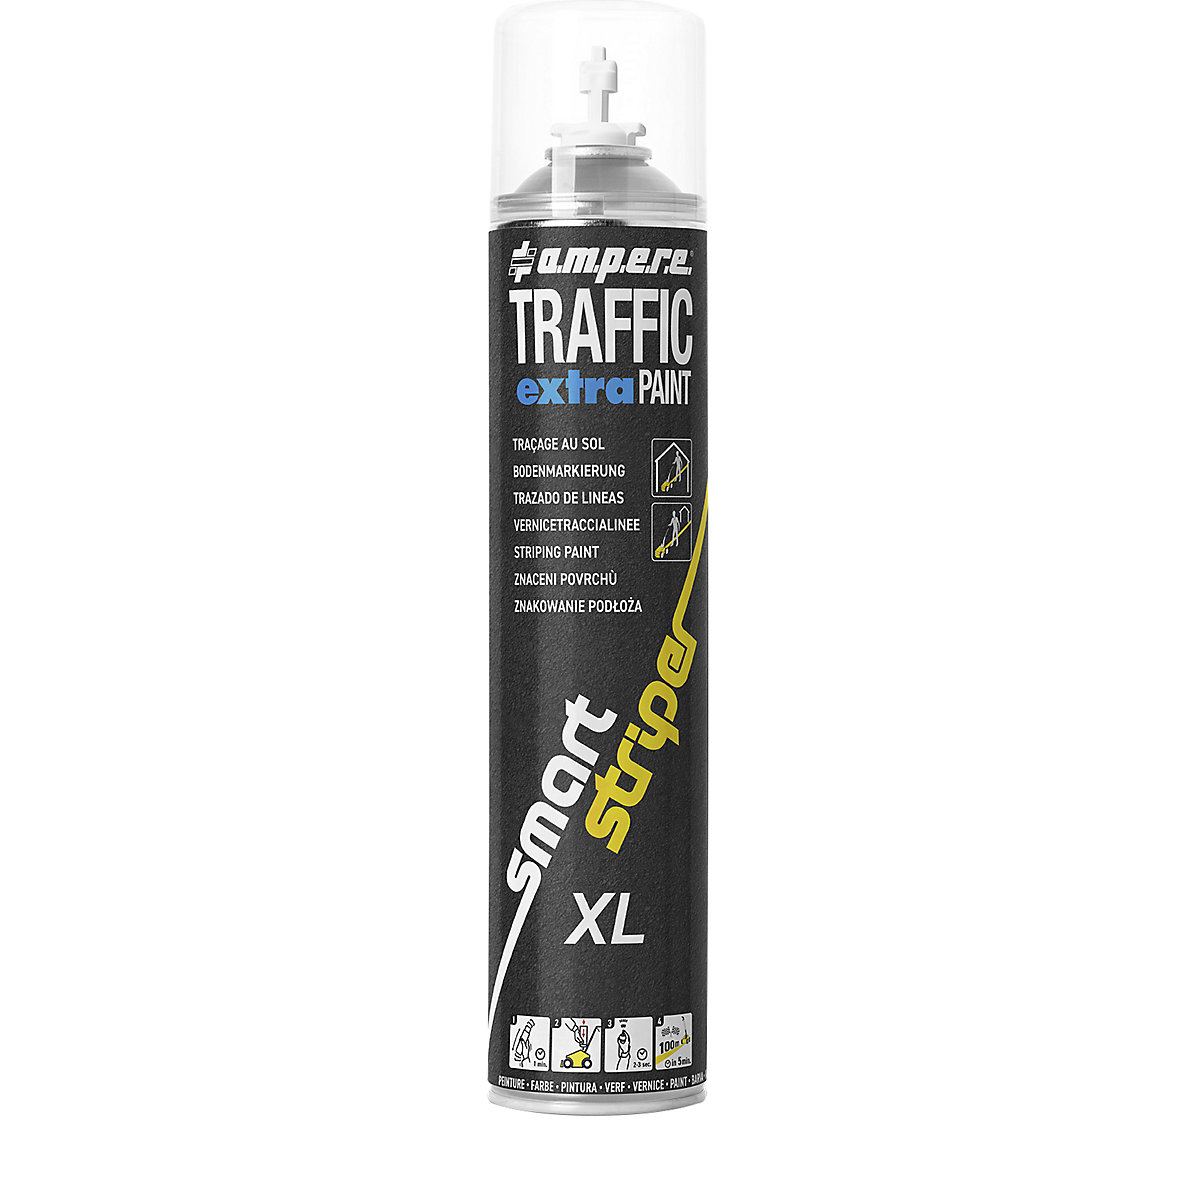 Traffic extra Paint® XL marking paint – Ampere, contents 750 ml, pack of 6, white-1